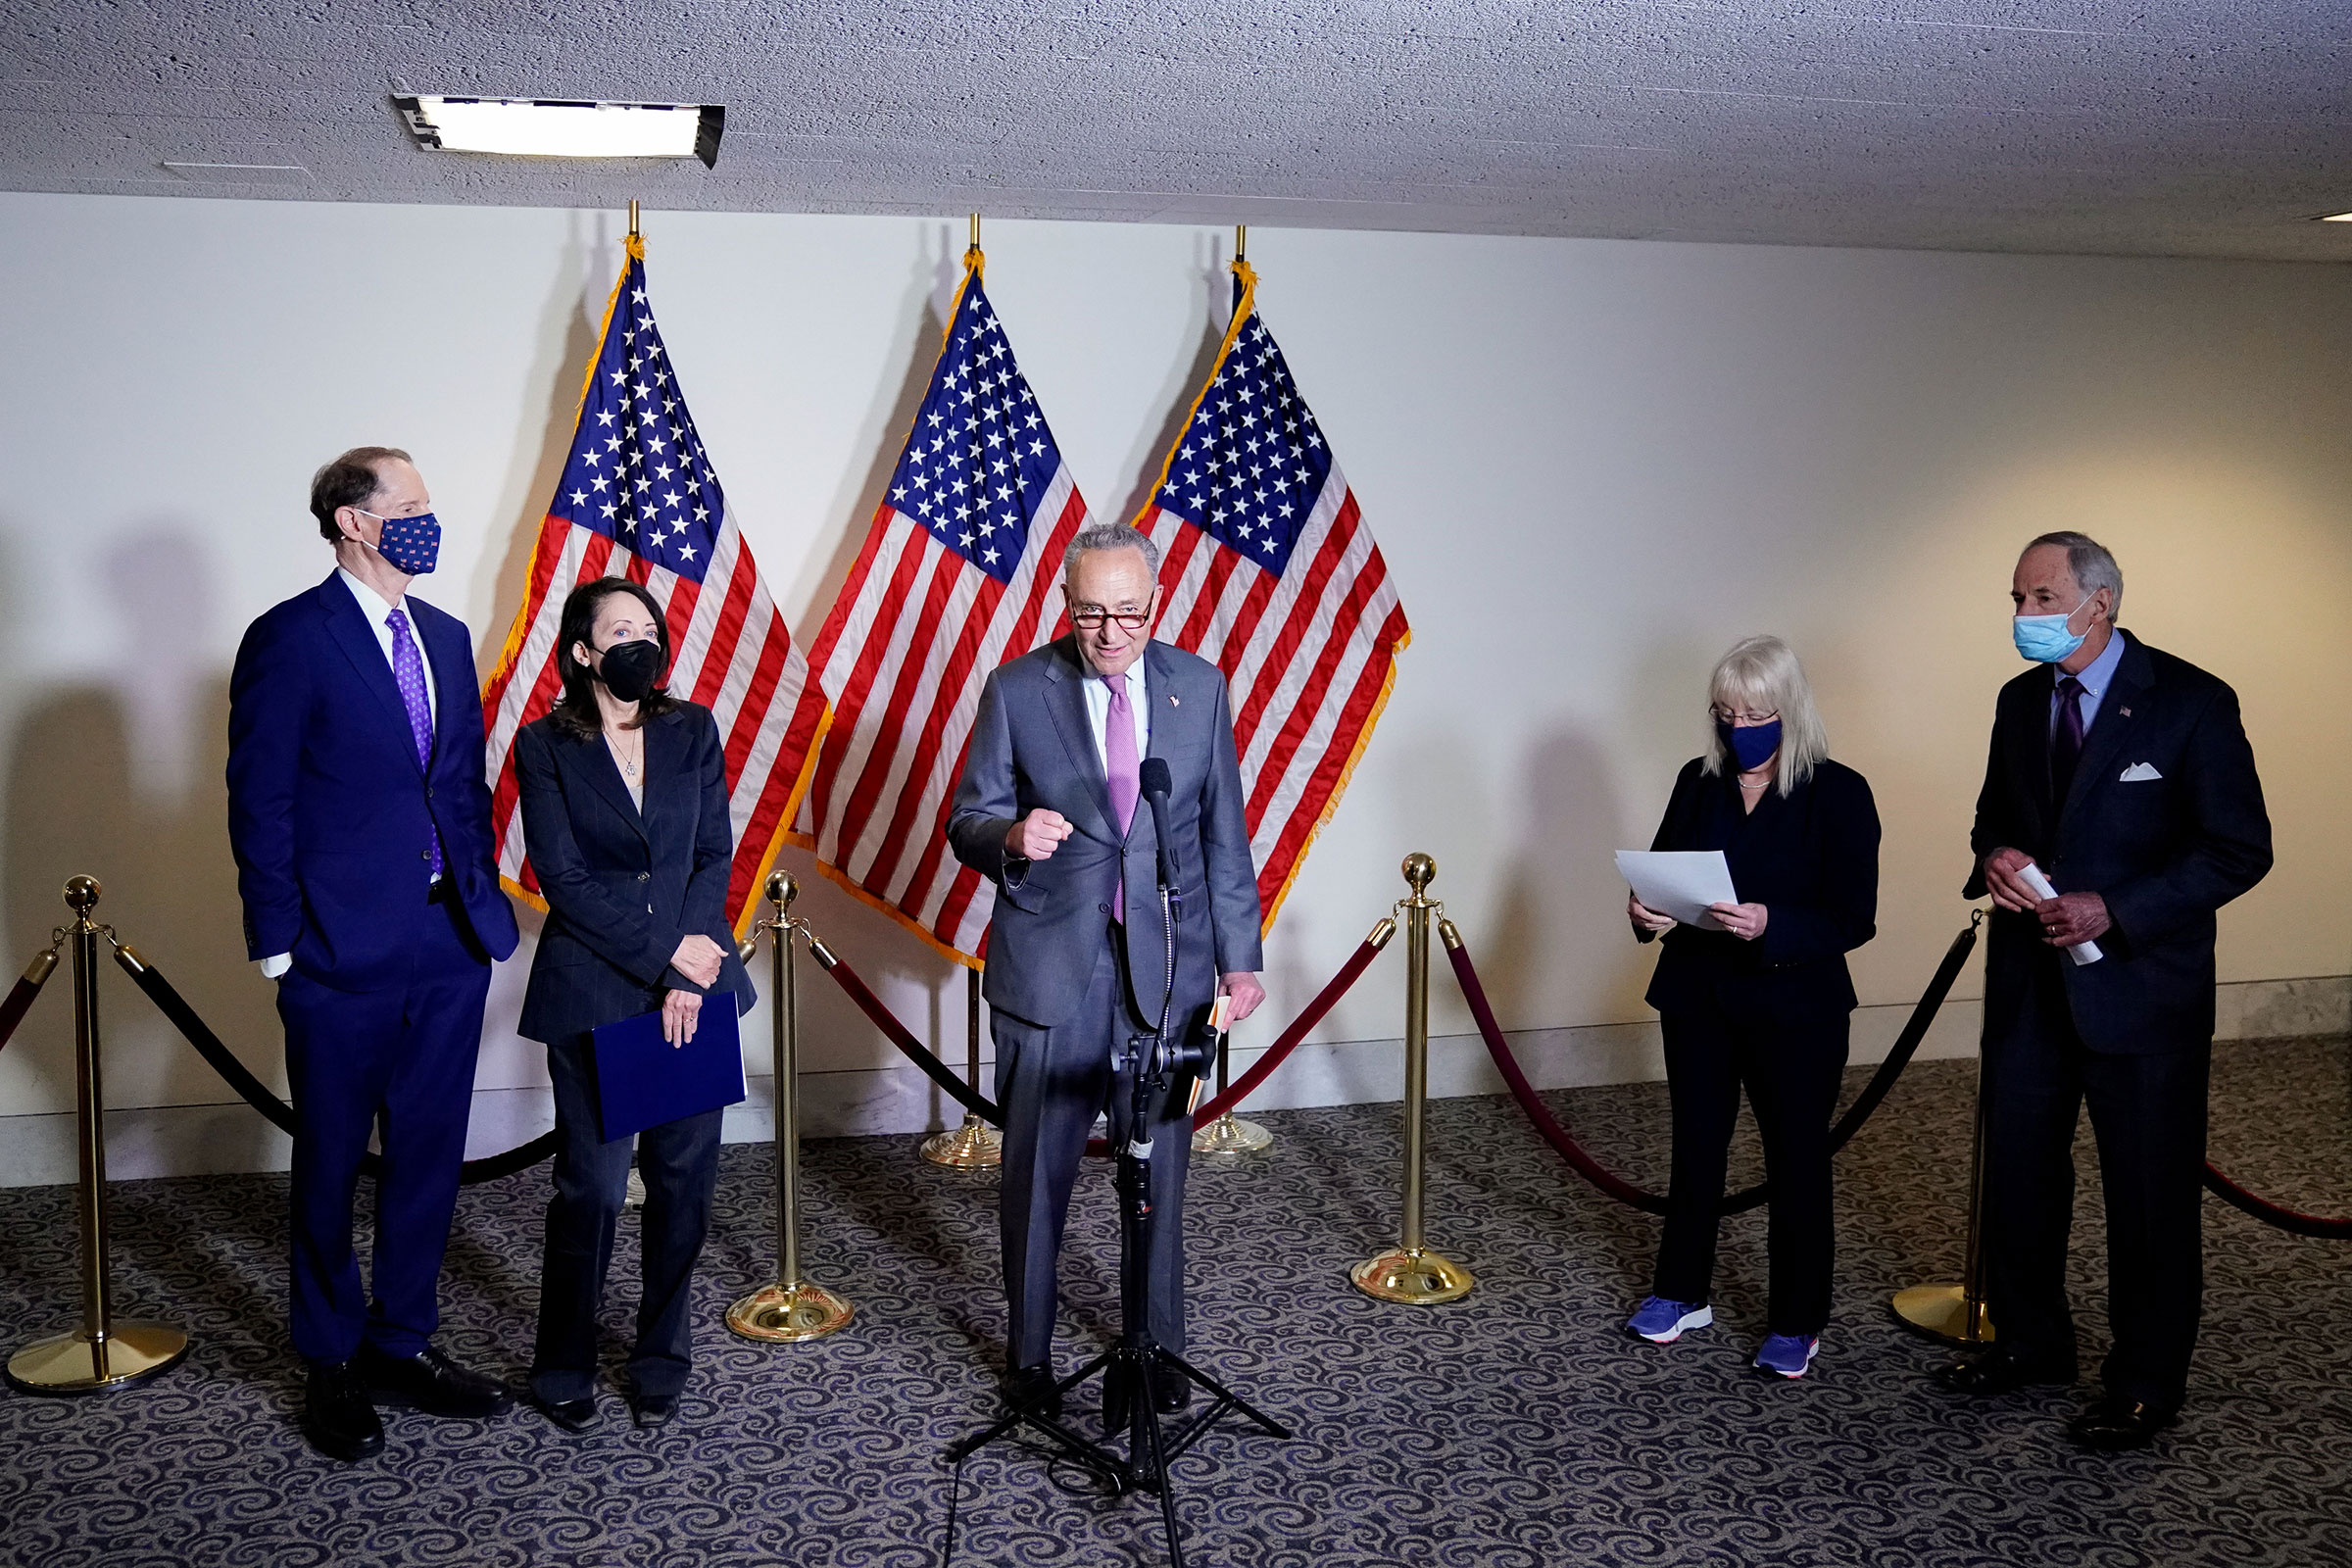 Senate Majority Leader Chuck Schumer and Democratic leadership hold a news conference after the first Democratic luncheon meeting since COVID-19 restrictions went into effect on Capitol Hill in Washington, on April 13, 2021. (Erin Scott—Reuters)